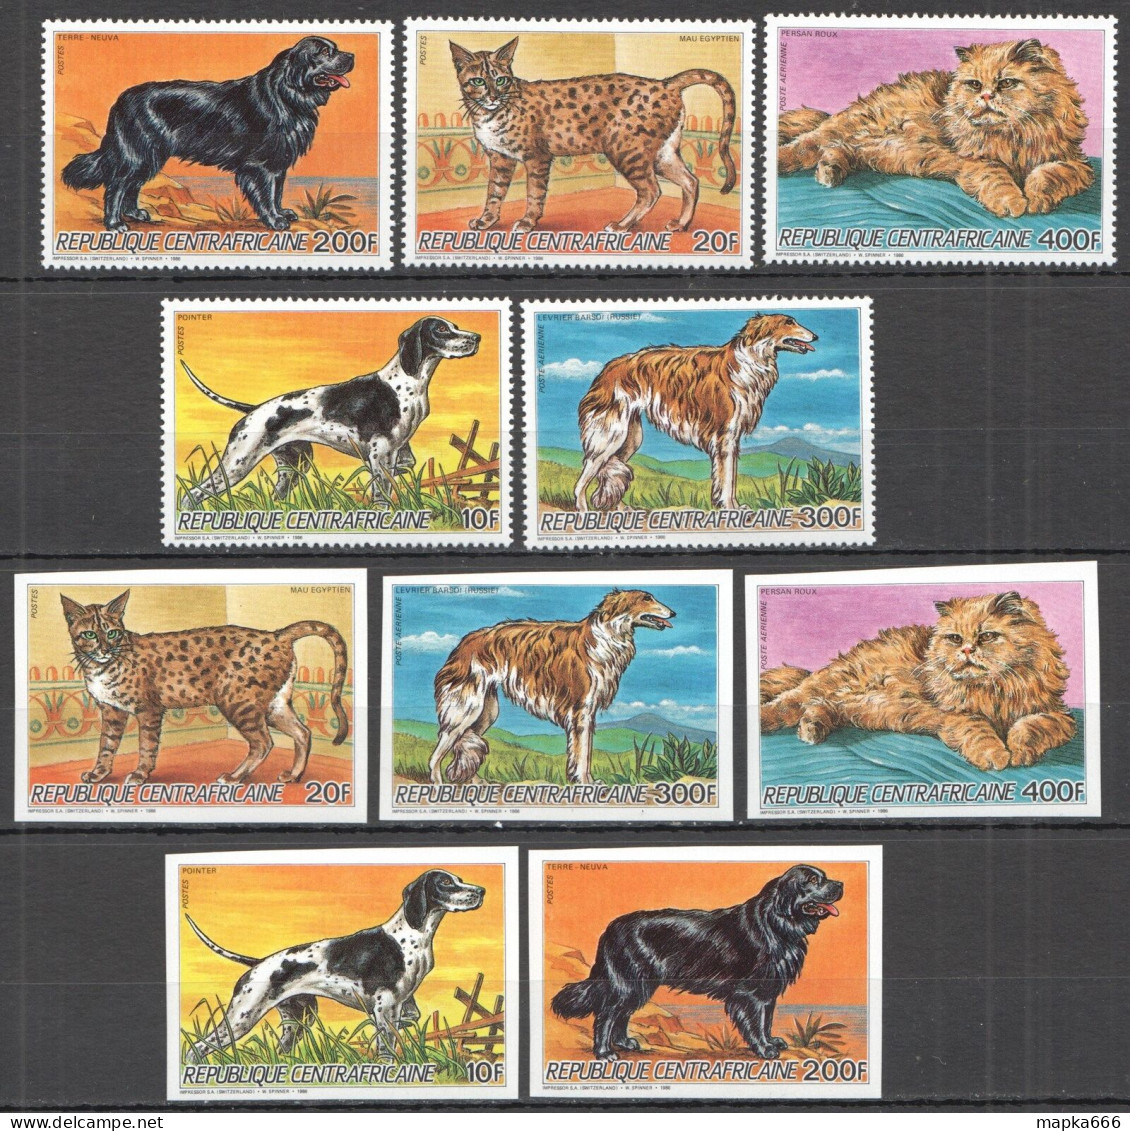 B1522 Imperf,Perf 1986 Central Africa Animals Pets Cats & Dogs #(1227-31)A+B Mnh - Katten